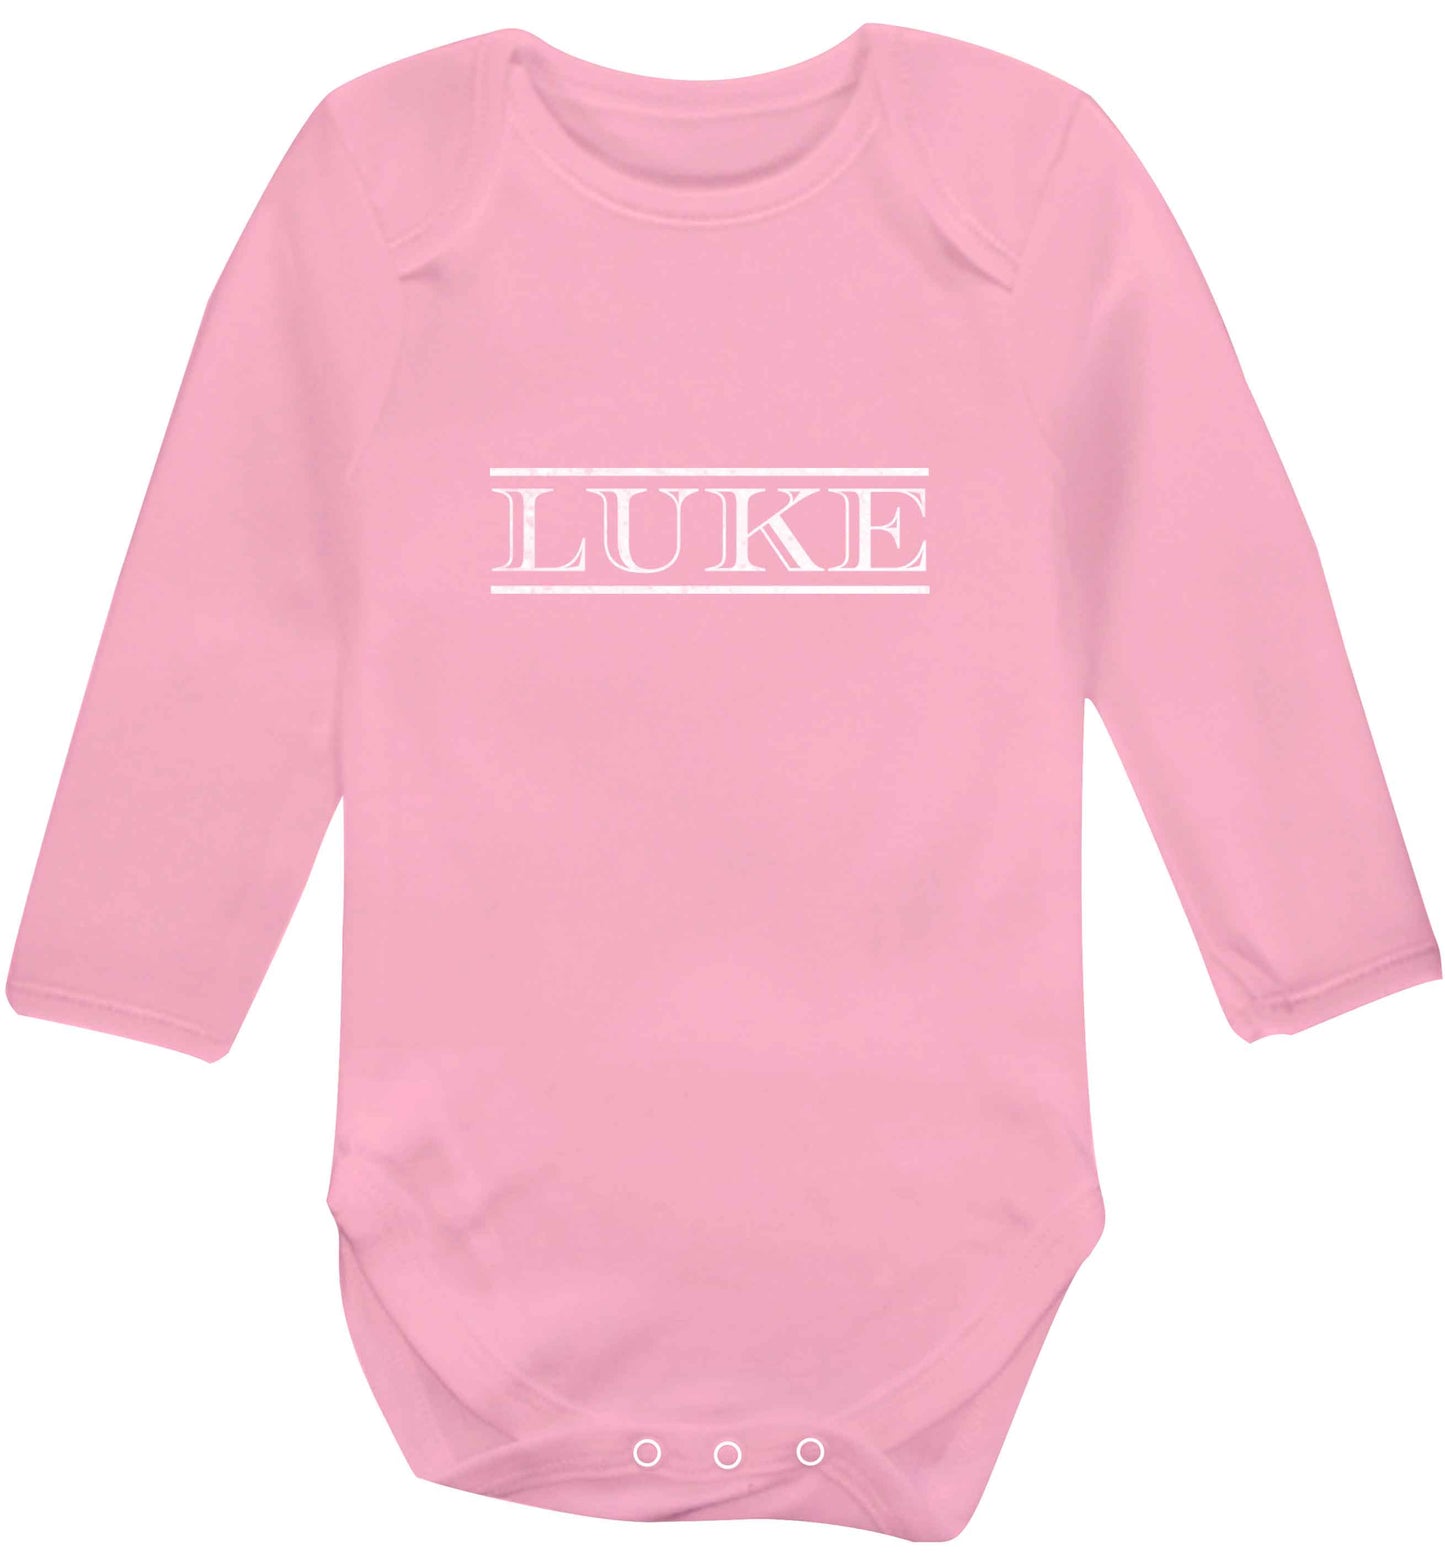 Personalised name baby vest long sleeved pale pink 6-12 months